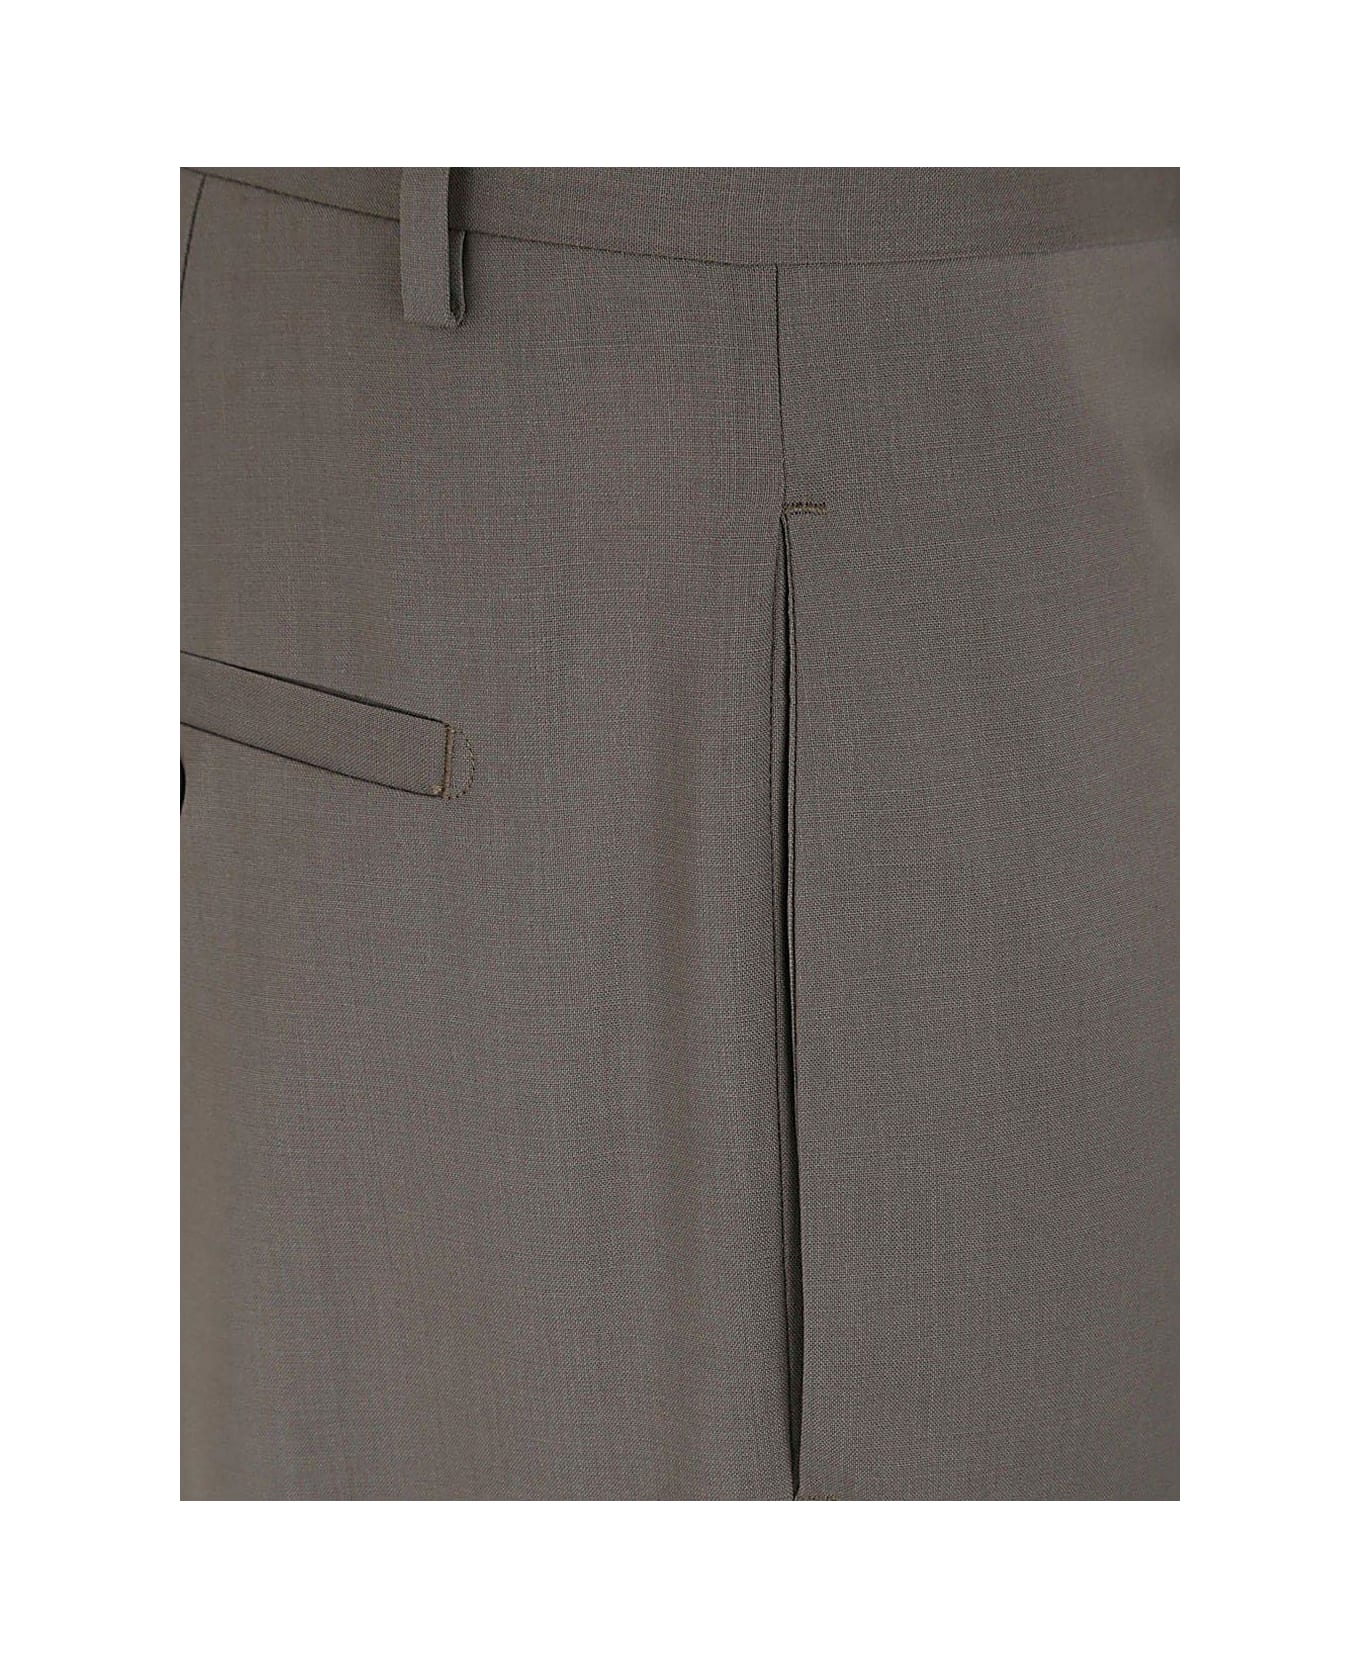 Rick Owens Tapered-leg Cropped Trousers - Dust ボトムス